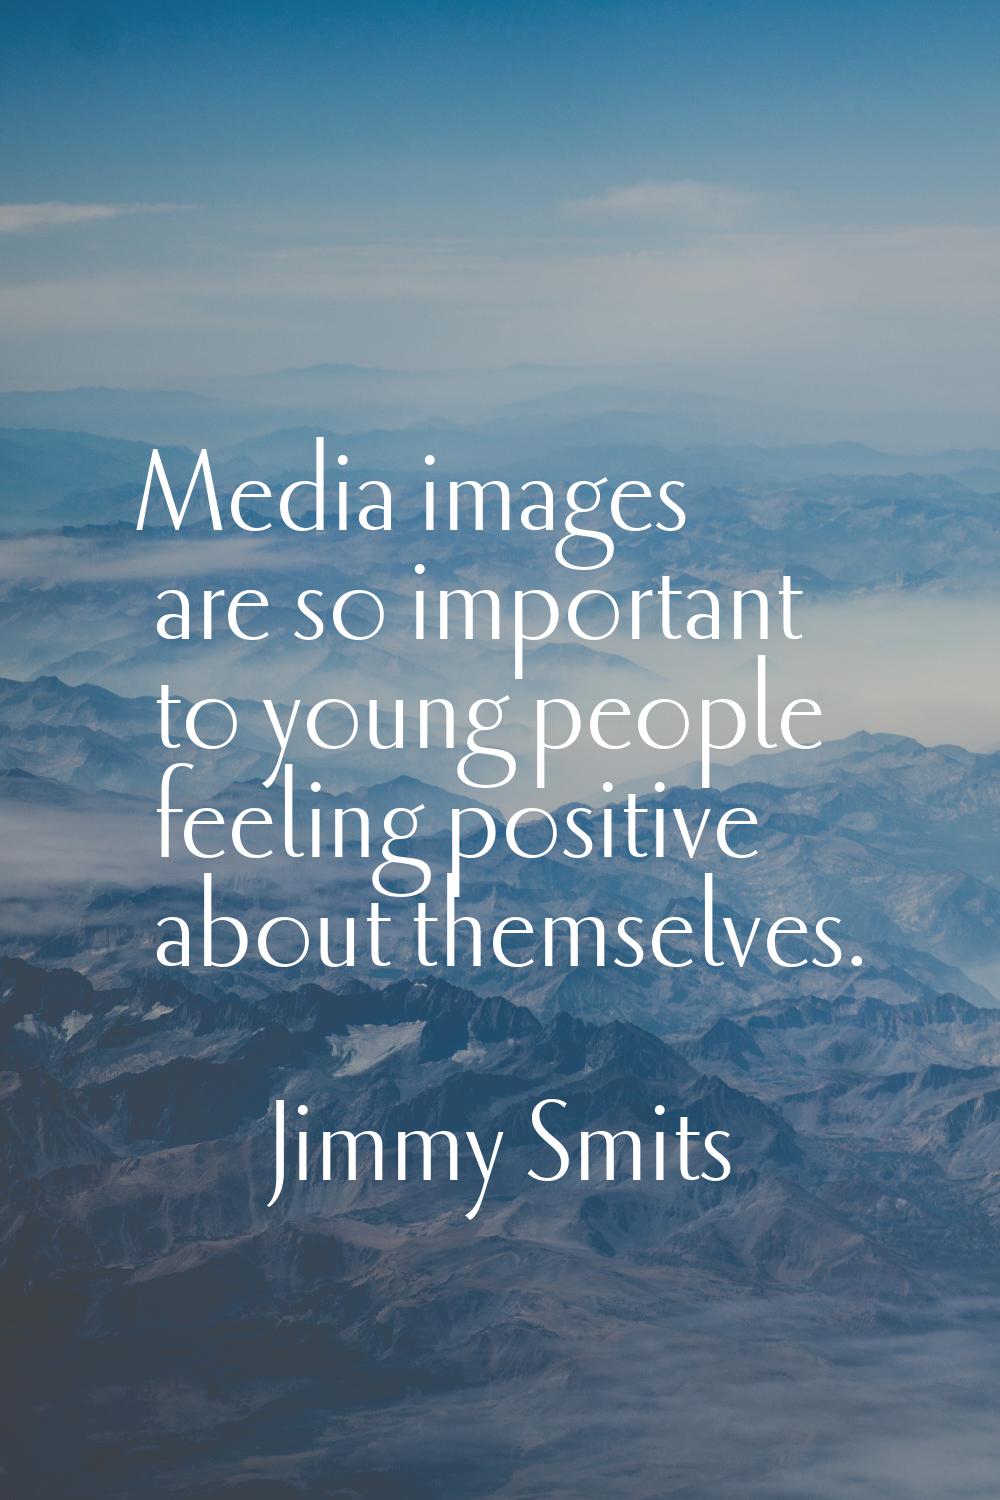 Media images are so important to young people feeling positive about themselves.